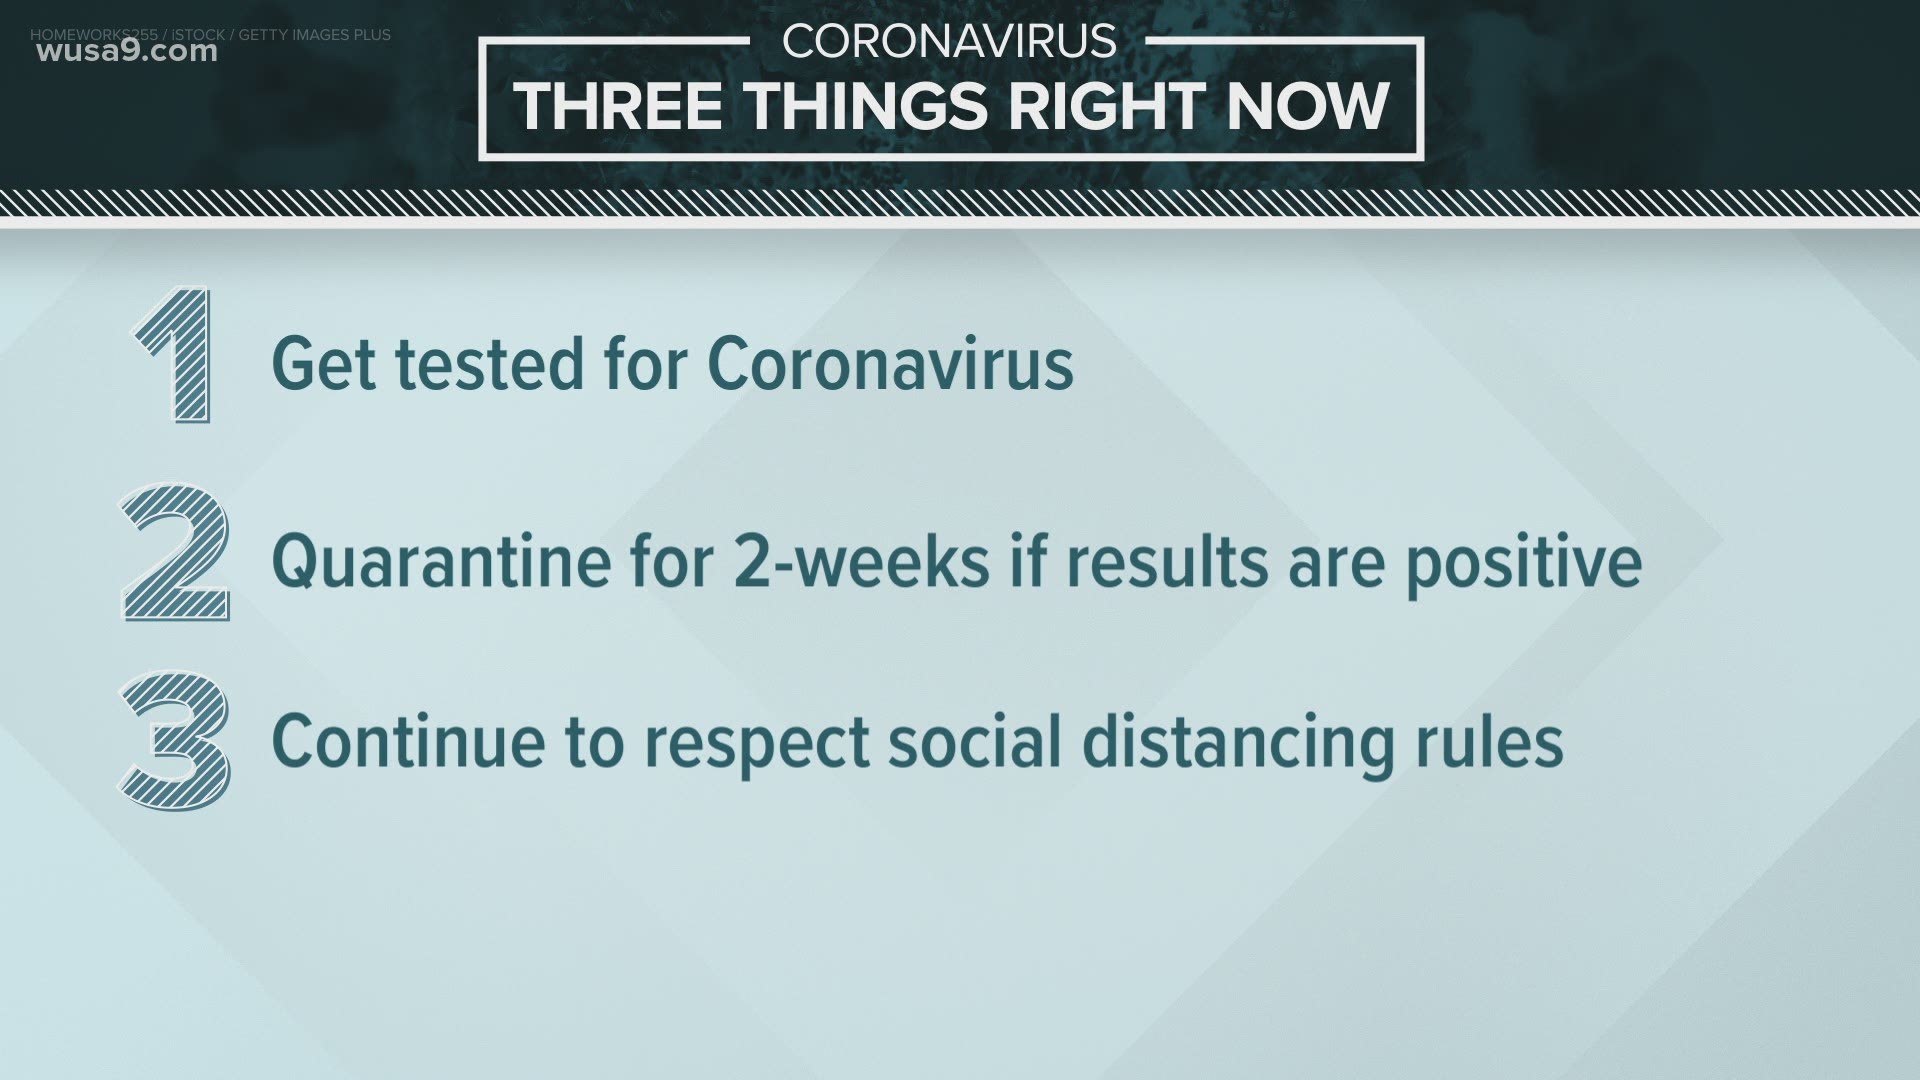 The fight against the coronavirus is far from over and we still need to do our part.